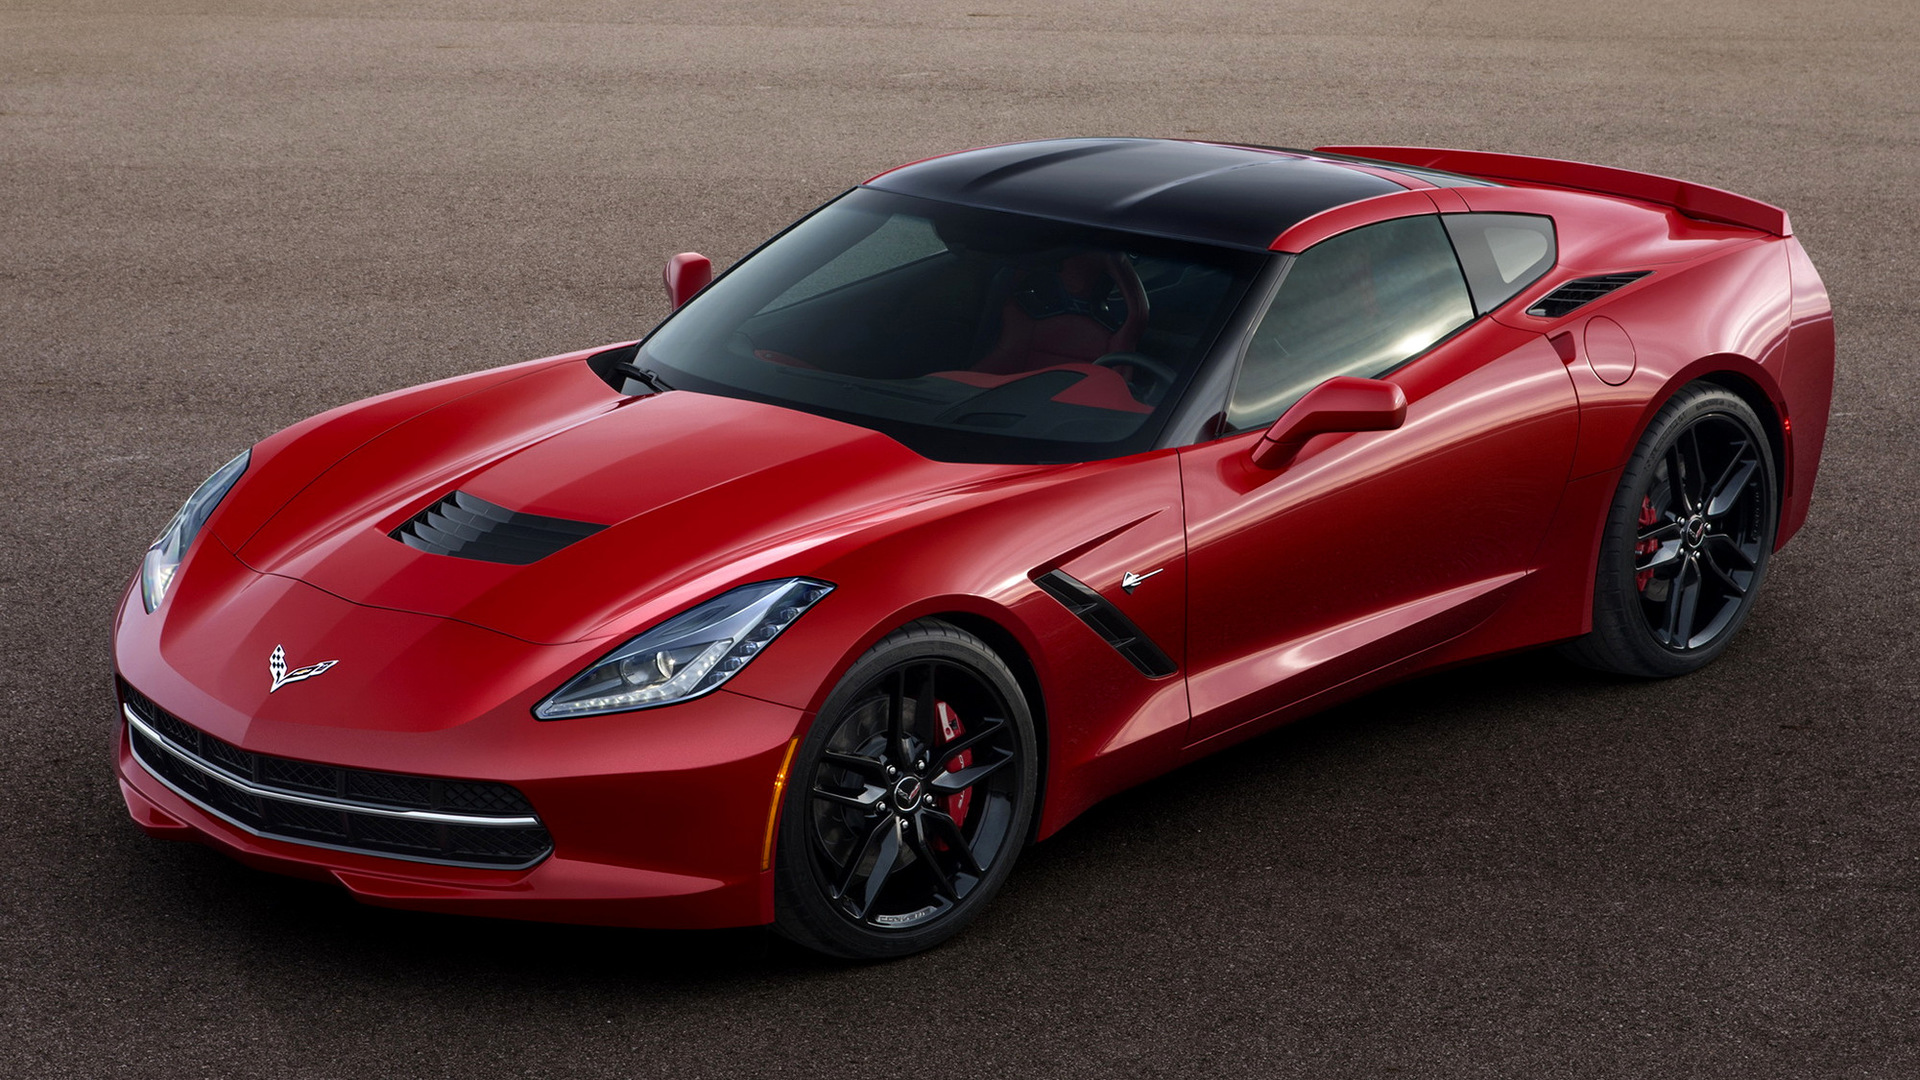 2014 Chevrolet Corvette Stingray Coupe - Wallpapers and HD ...
